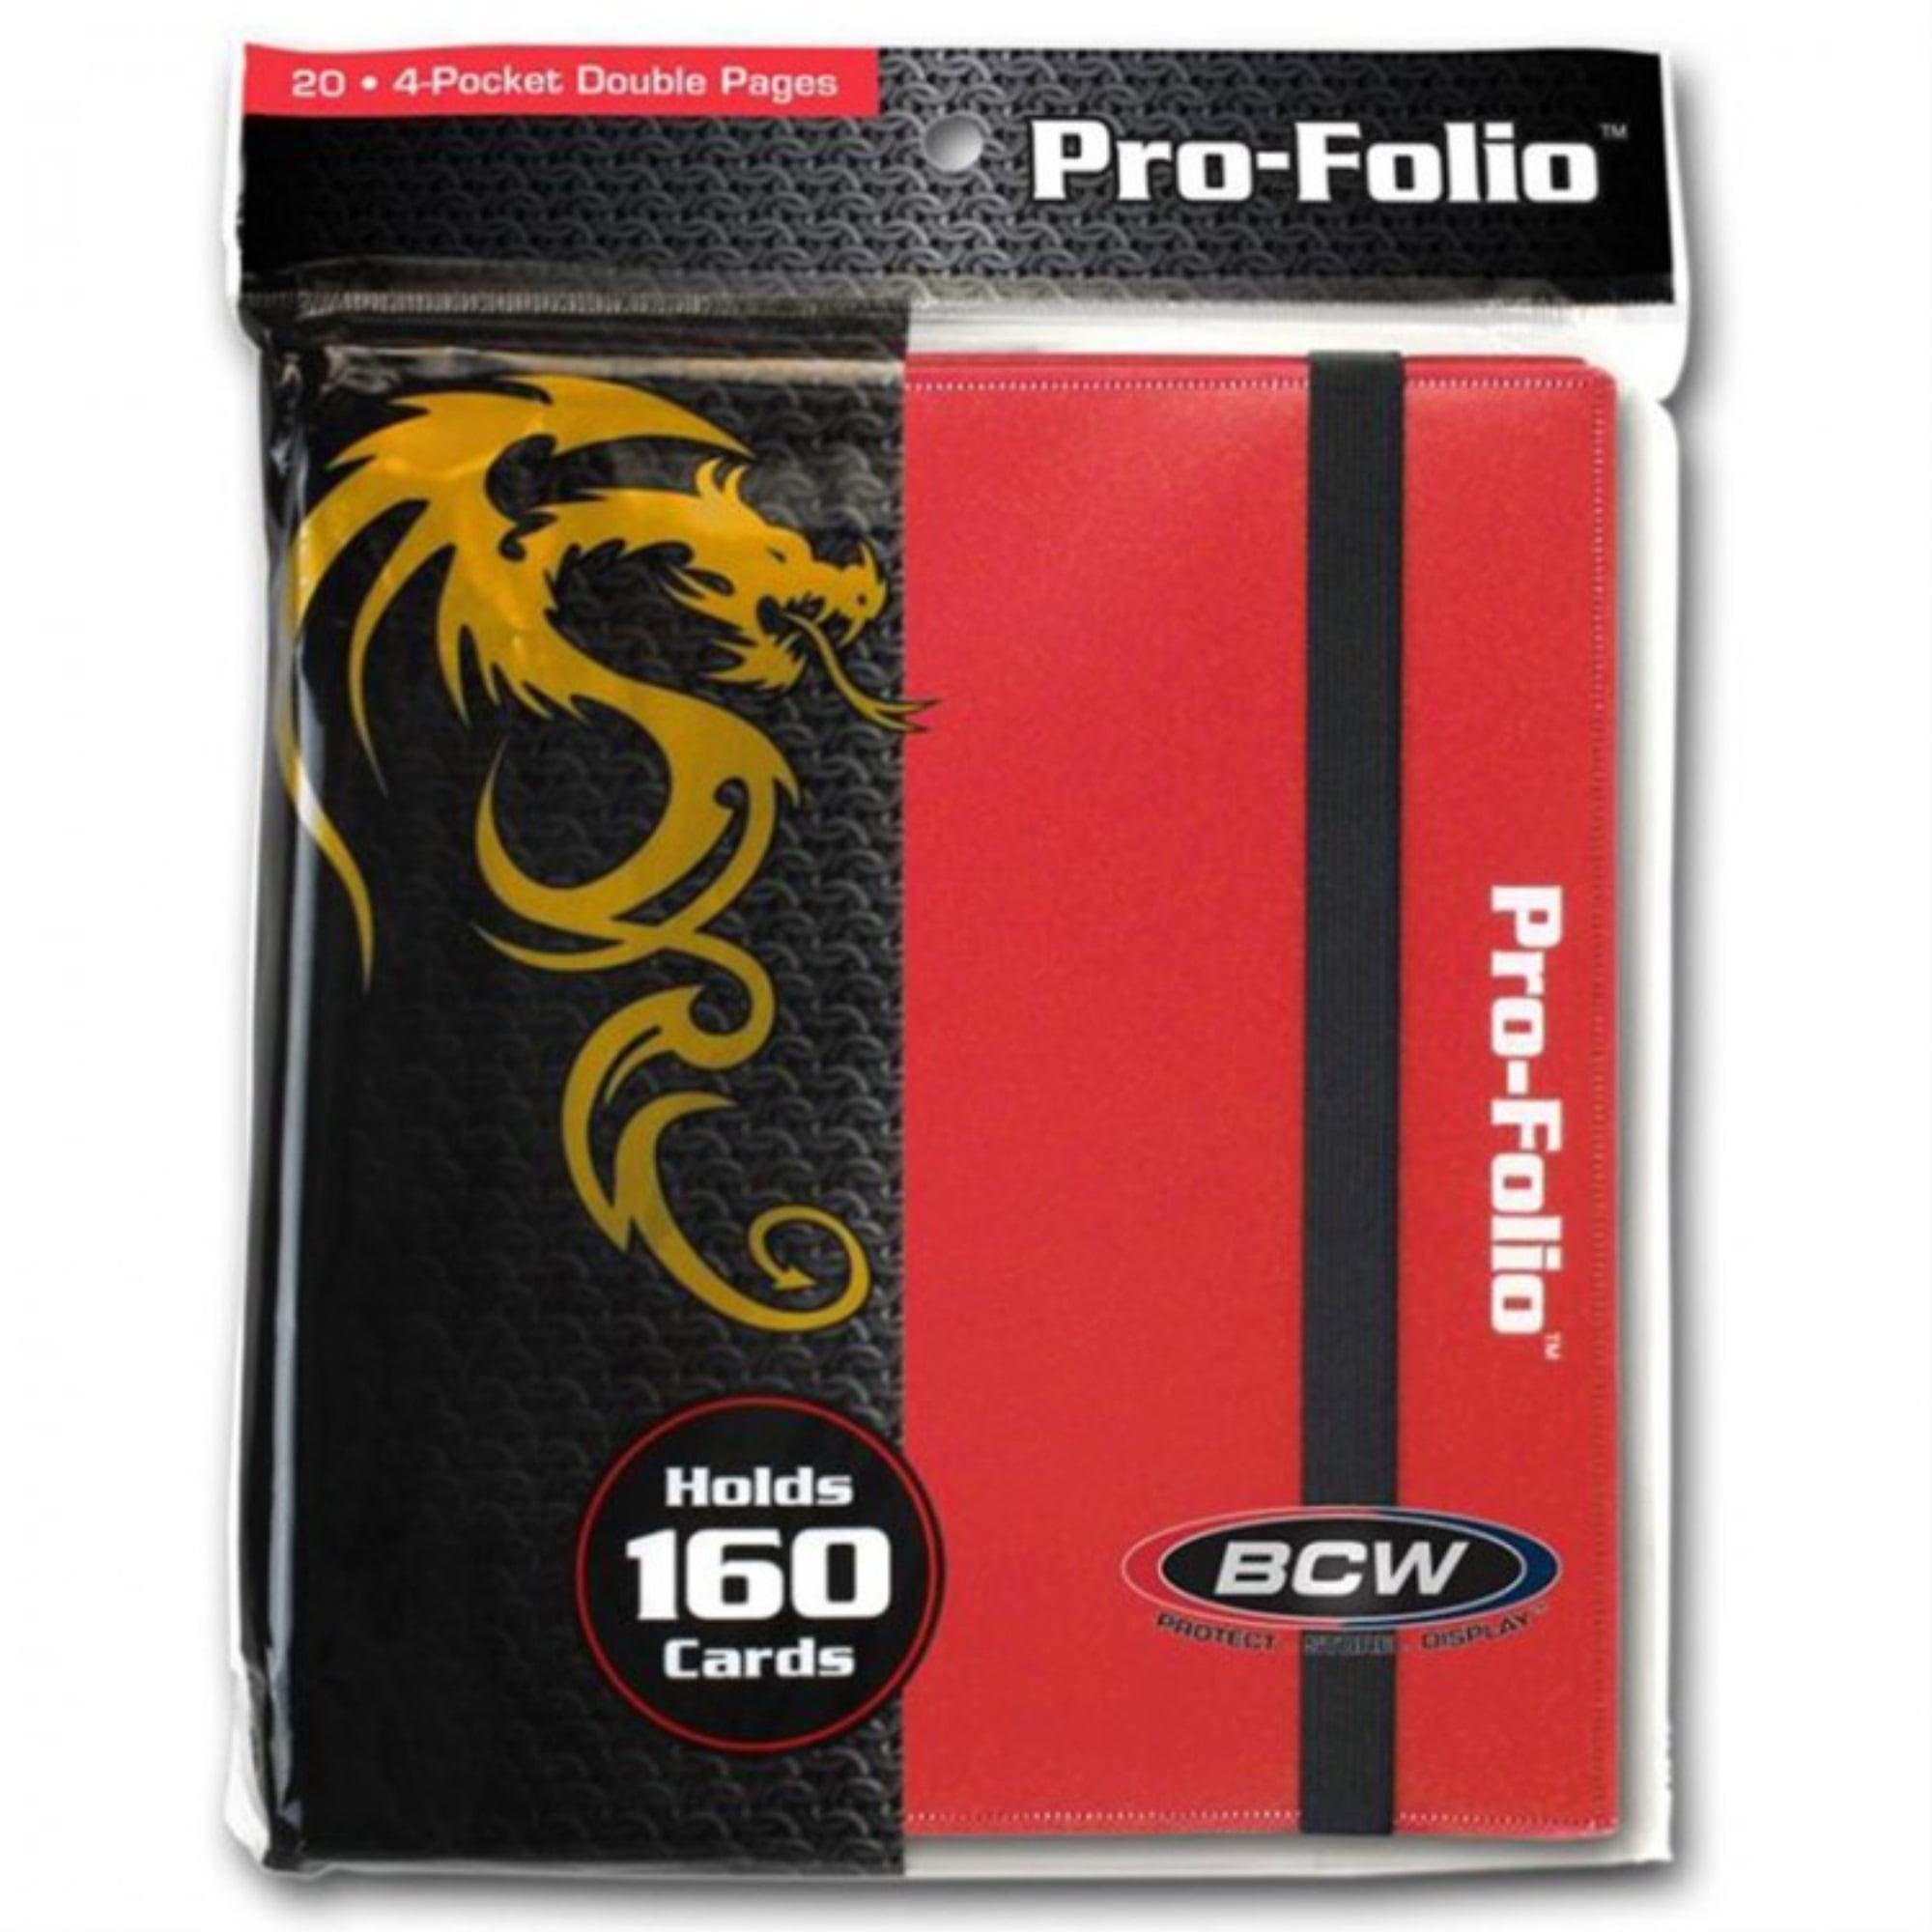 1 Ultra Pro RED & WHITE Pro-Binder Album 4 Pocket Pages holds 160 Cards Gaming 